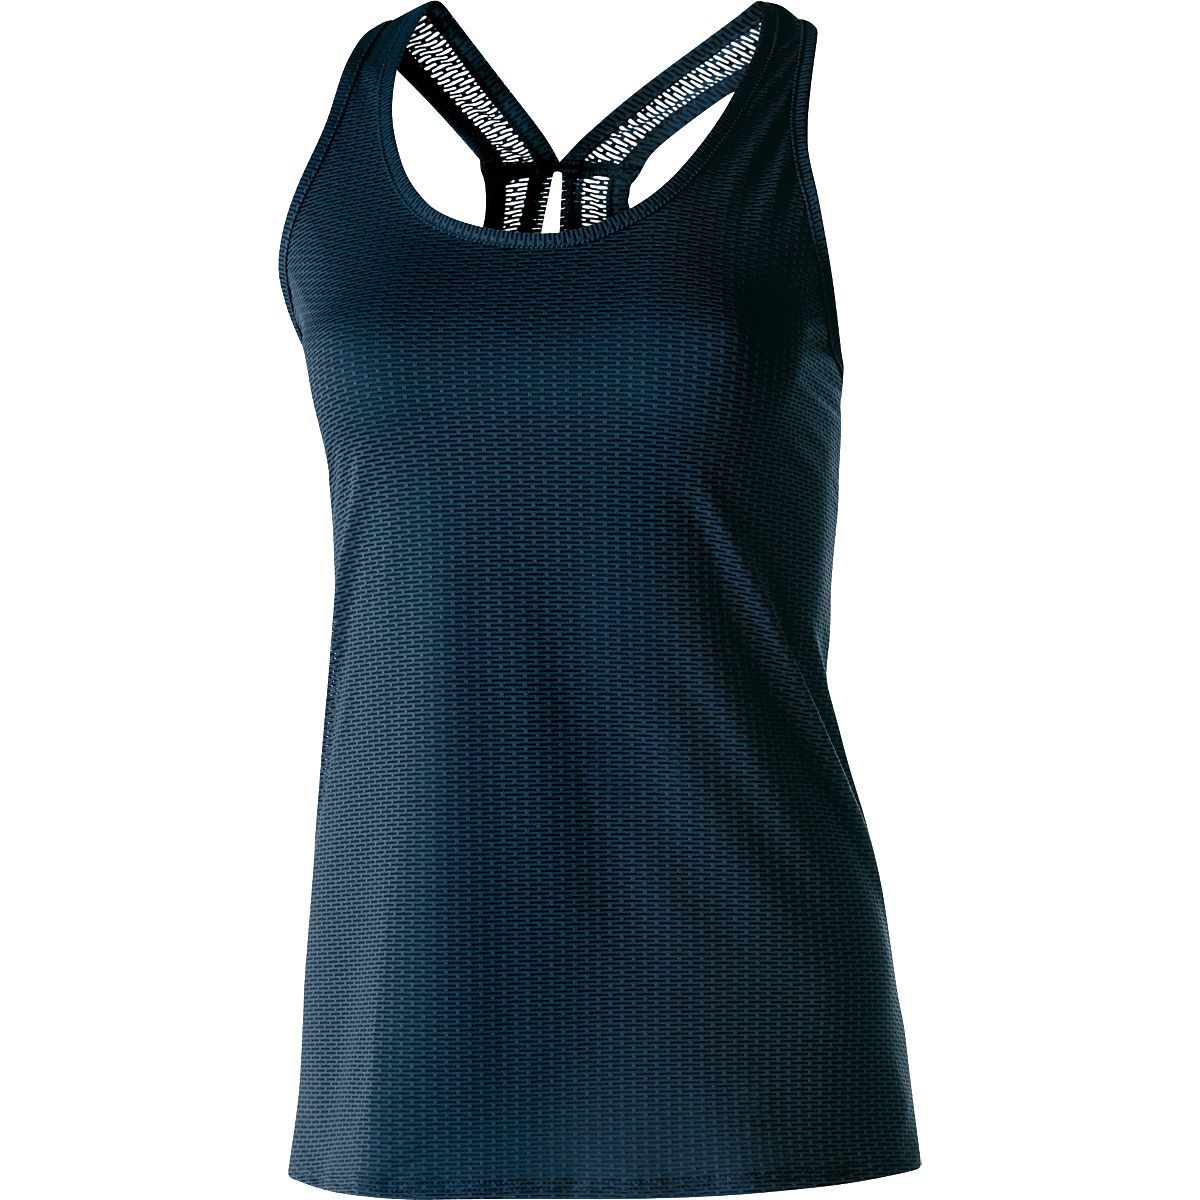 Holloway Ladies Precision Tank in Navy  -Part of the Ladies, Ladies-Tank, Holloway, Shirts product lines at KanaleyCreations.com